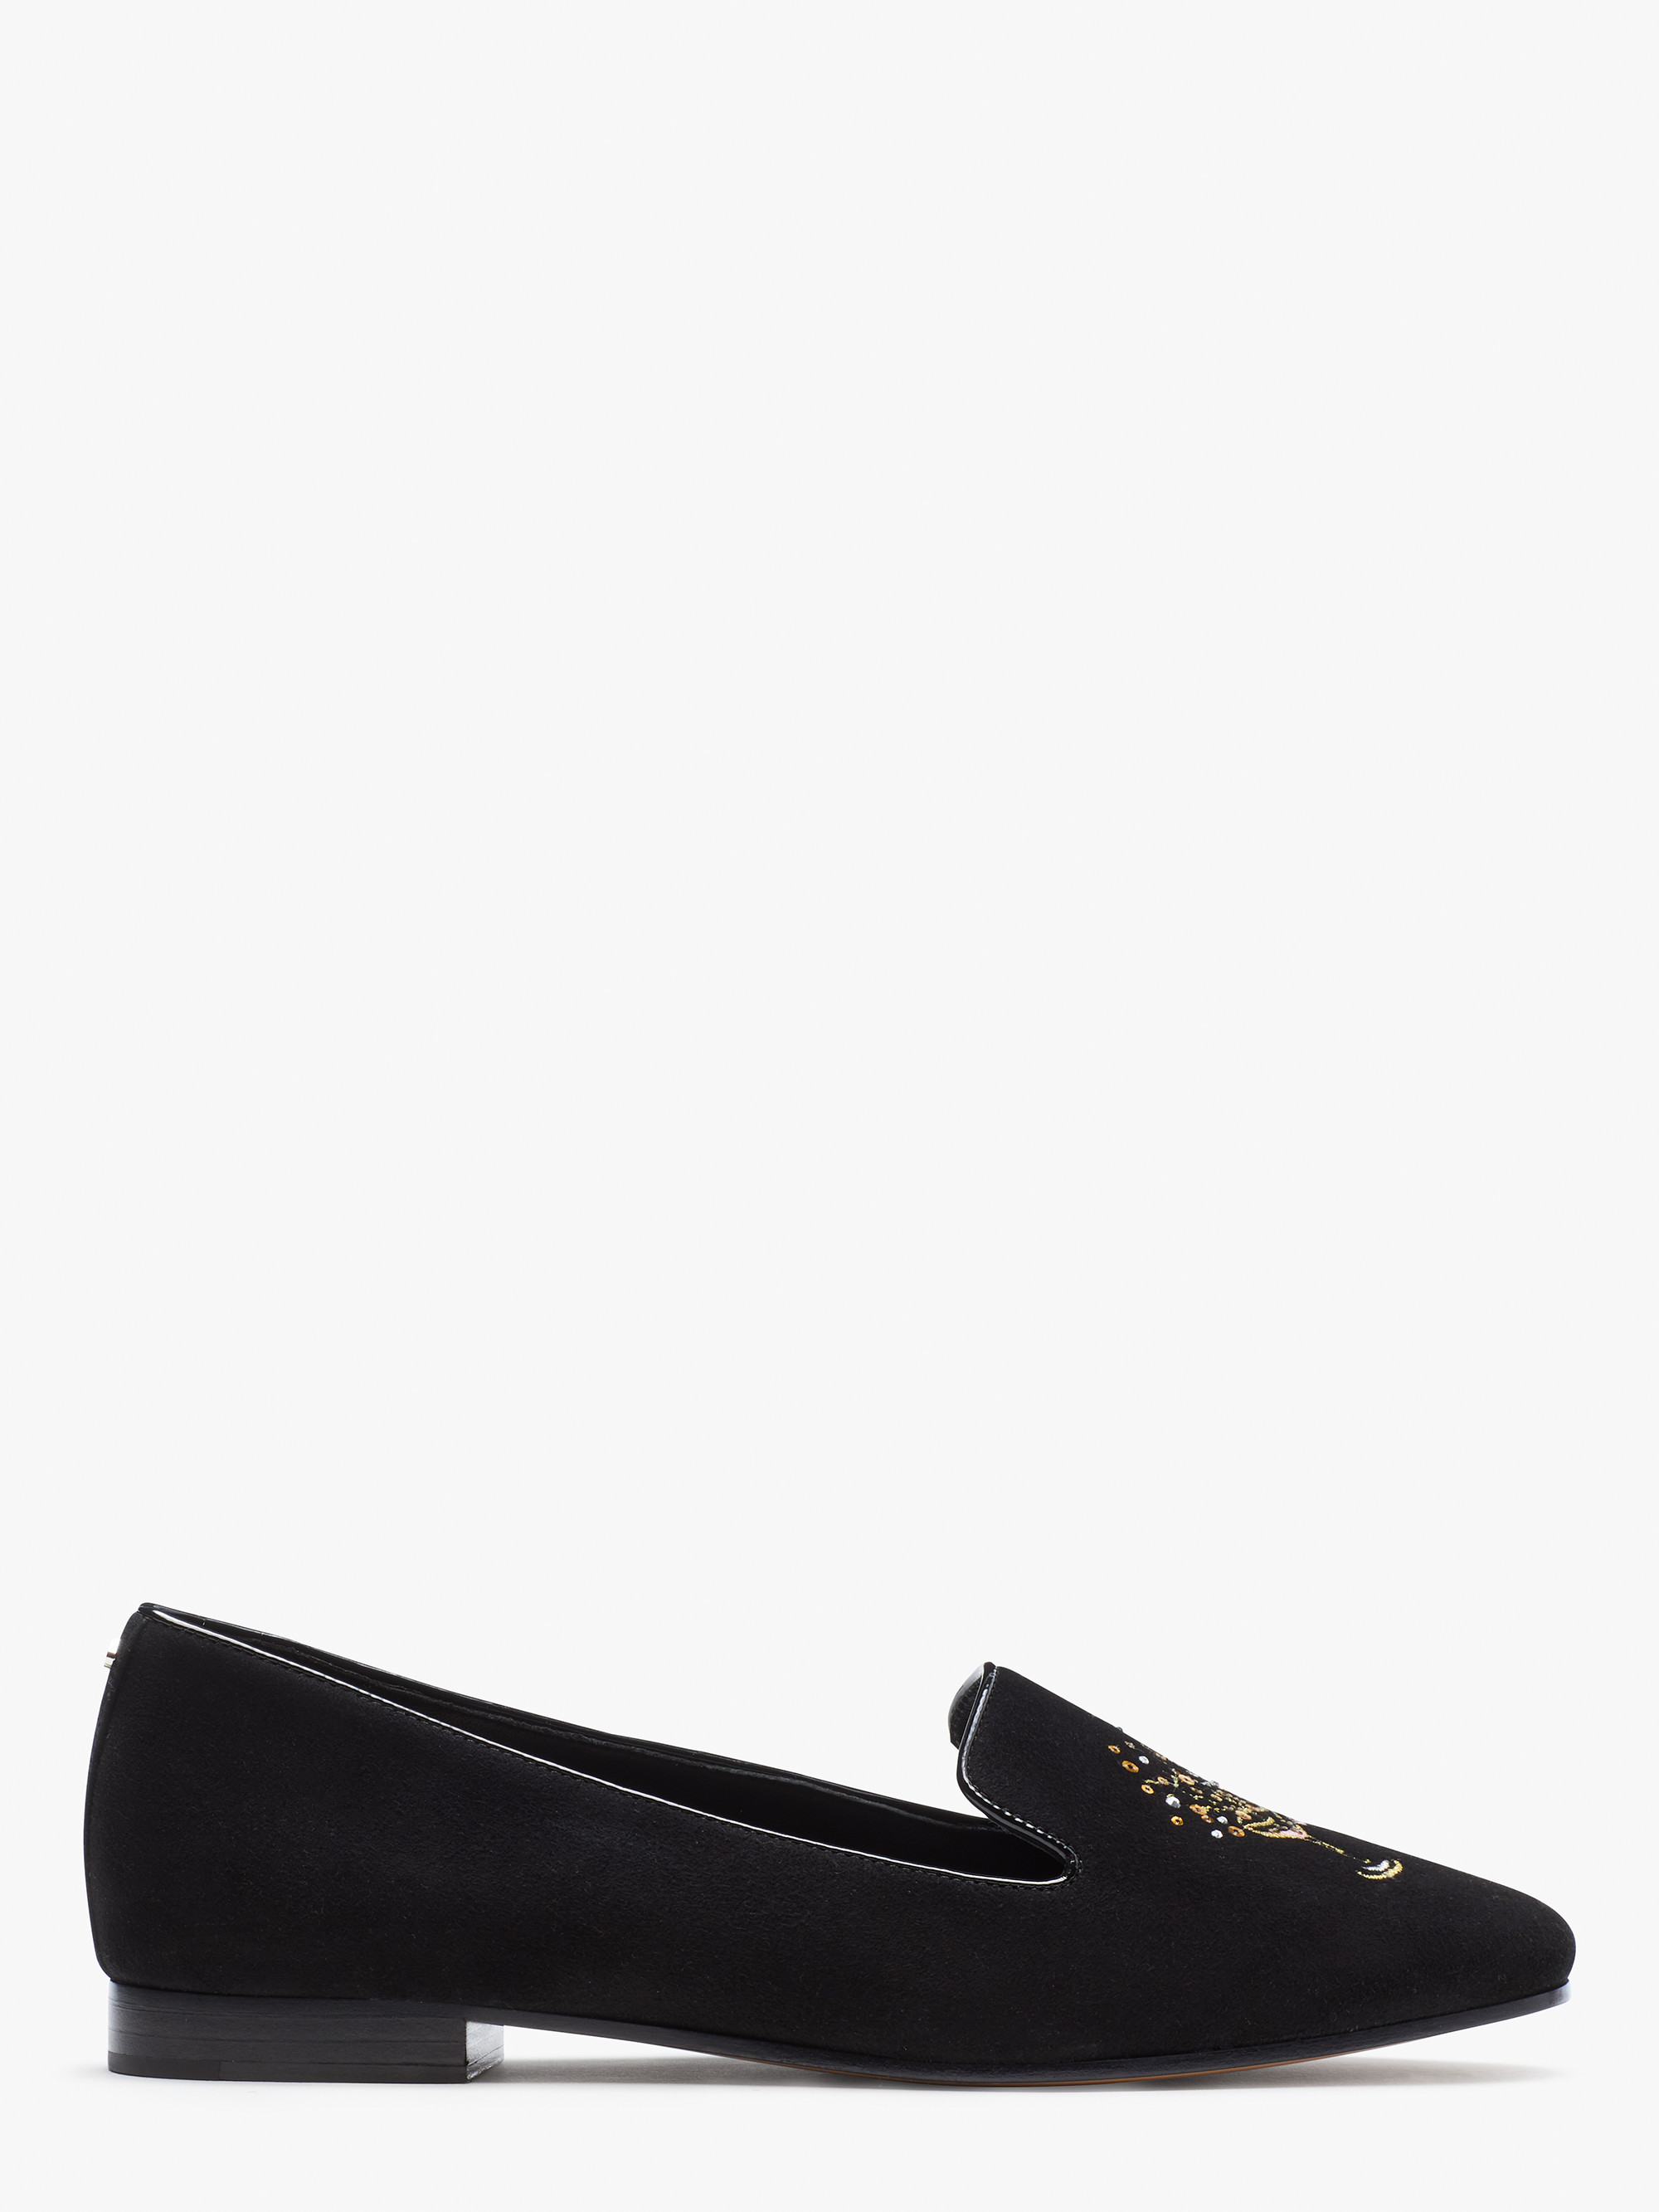 Kate Spade Lounge Fizzy Loafers